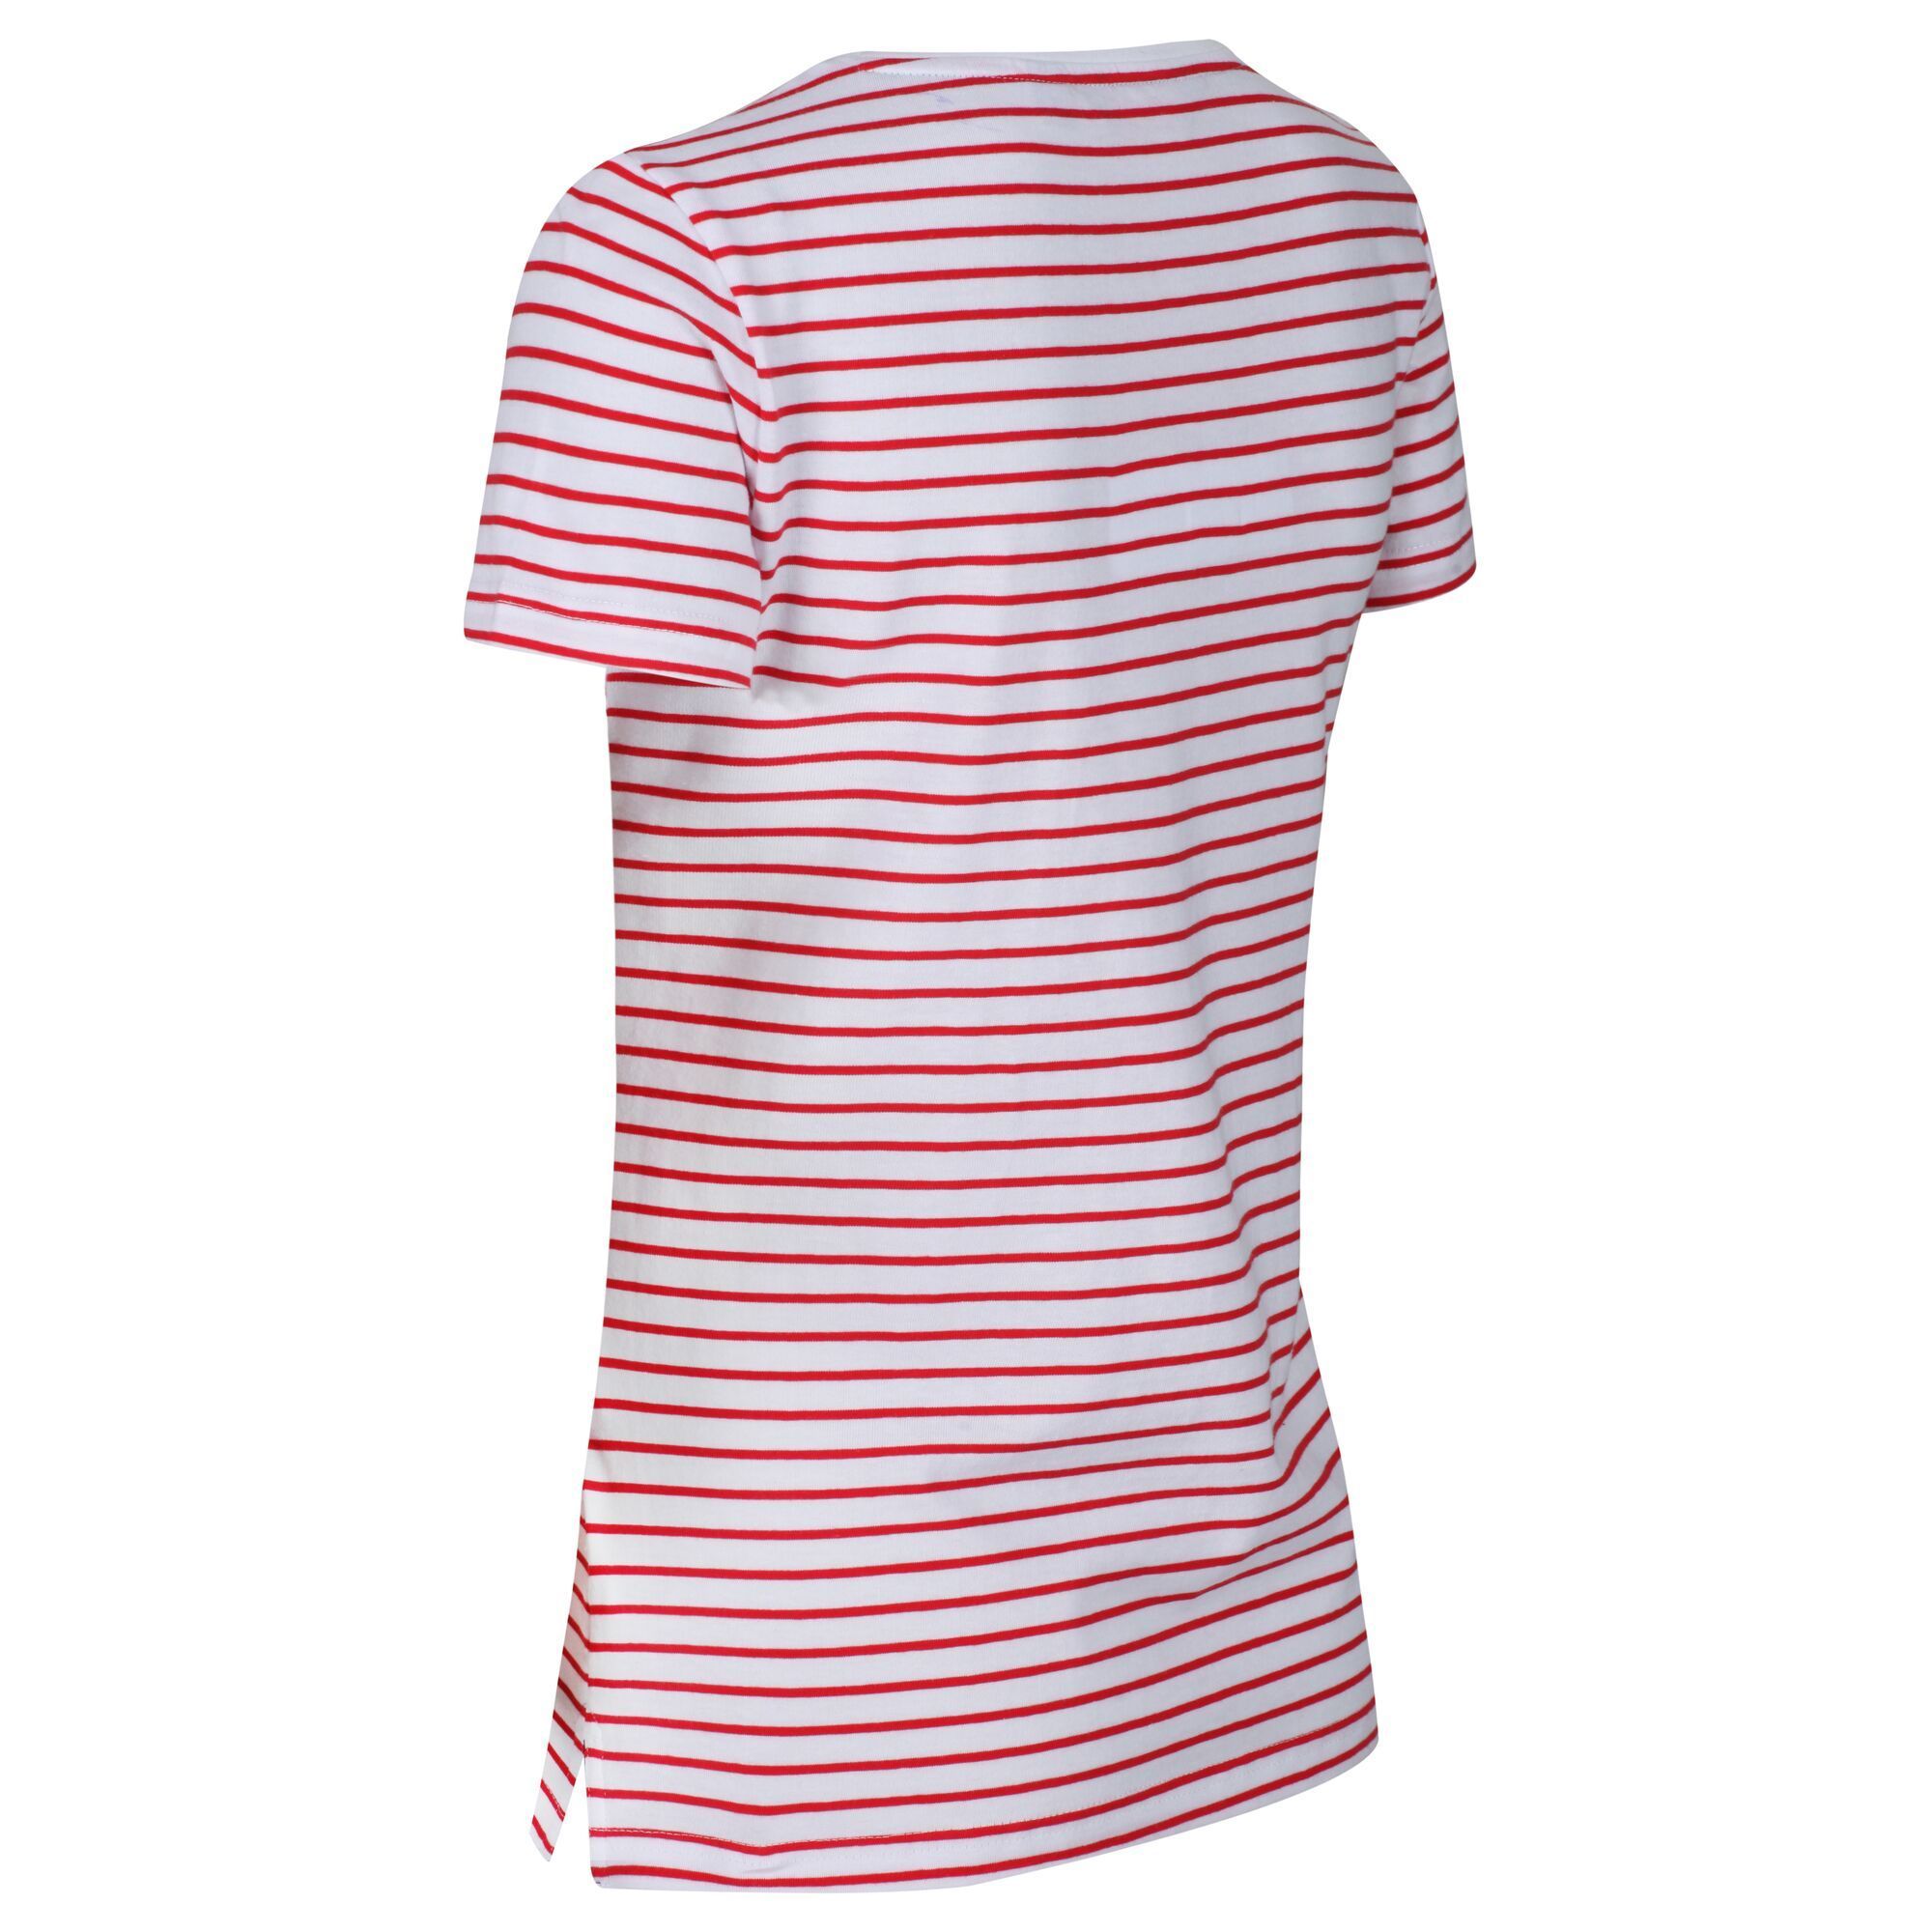 Material: 100% cotton. Stripe jersey fabric. Foil print to chest. Round neck.